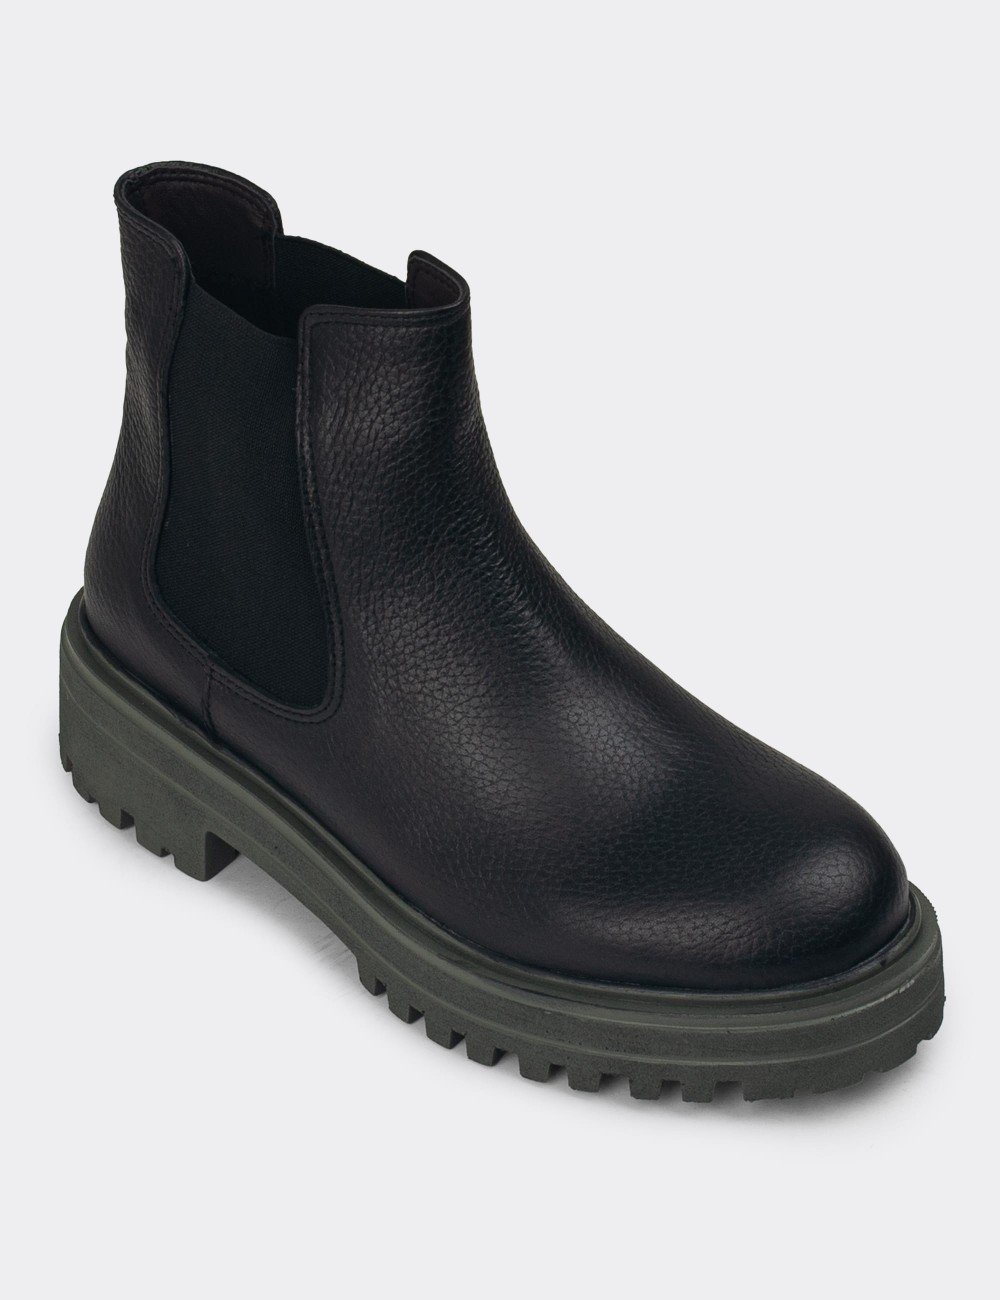 Black Leather Chelsea Boots - 01801ZSYHE04